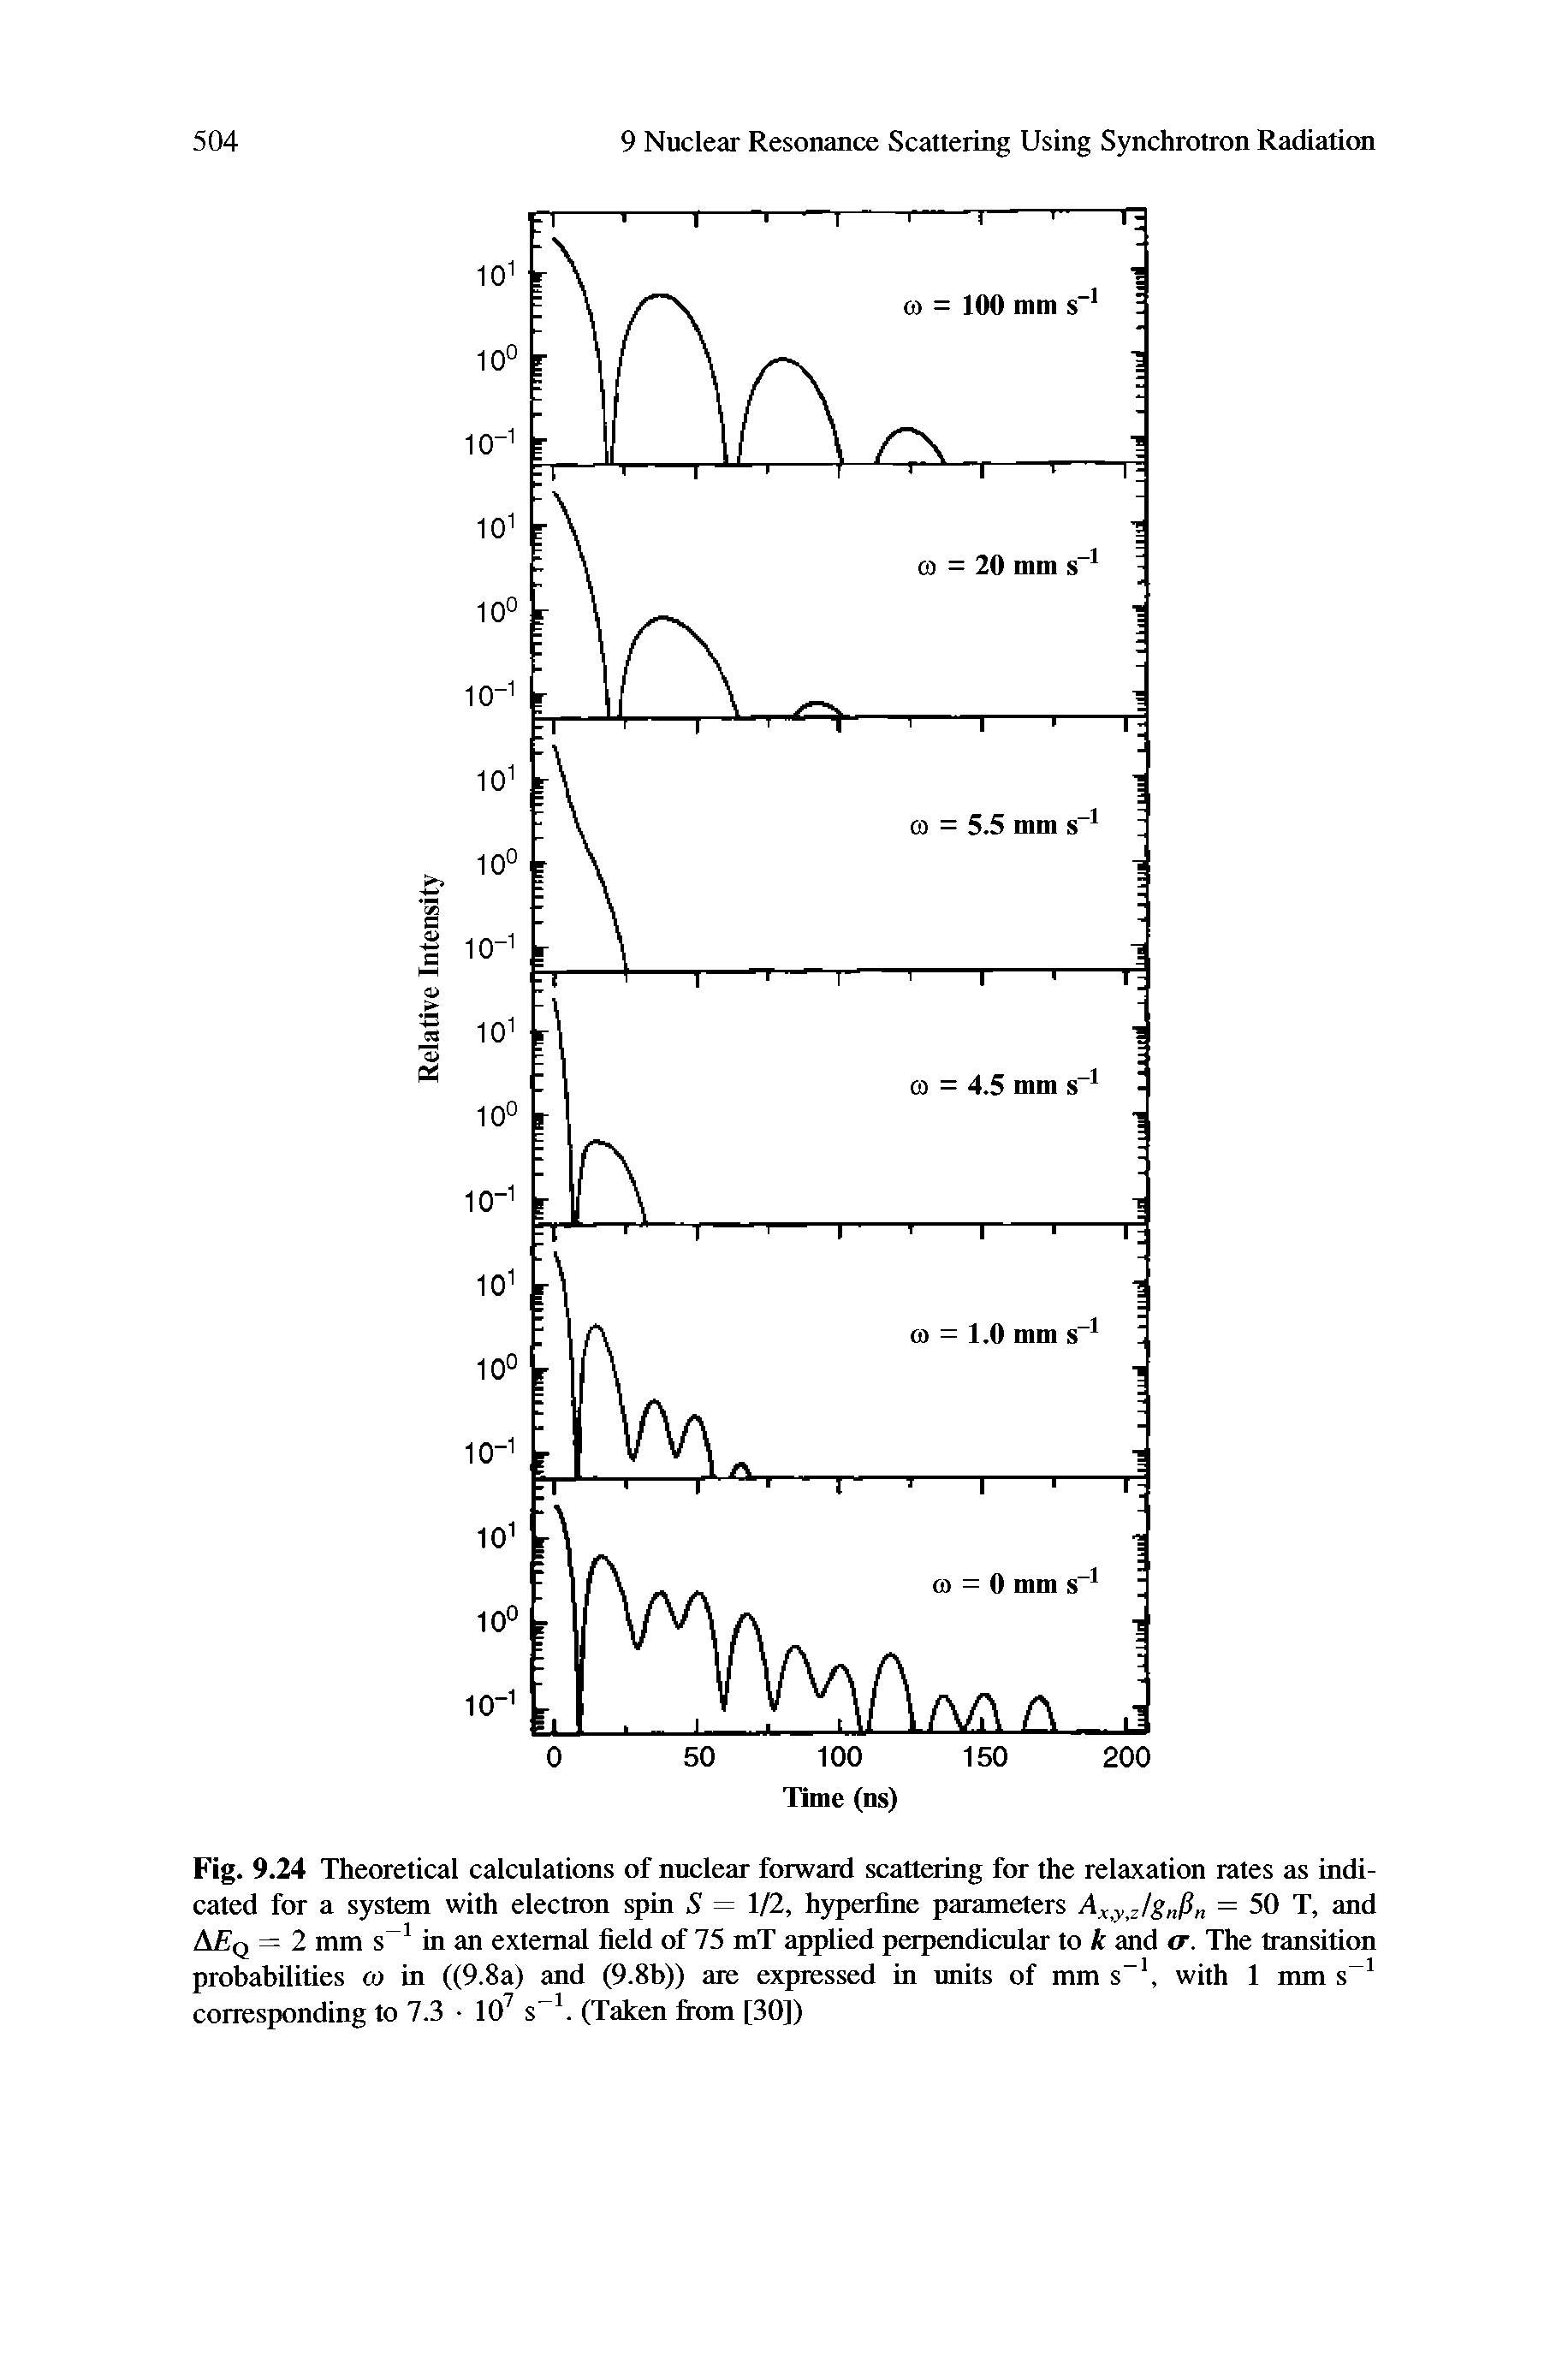 Fig. 9.24 Theoretical calculations of nuclear forward scattering for the relaxation rates as indicated for a system with electron spin S = 1/2, hyperfine parameters A y jg fi = 50 T, and AF.q = 2 mm s in an external field of 75 mT applied perpendicular to k and O . The transition probabilities co in ((9.8a) and (9.8b)) are expressed in units of mm s , with 1 mm corresponding to 7.3 10 s. (Taken Ifom [30])...